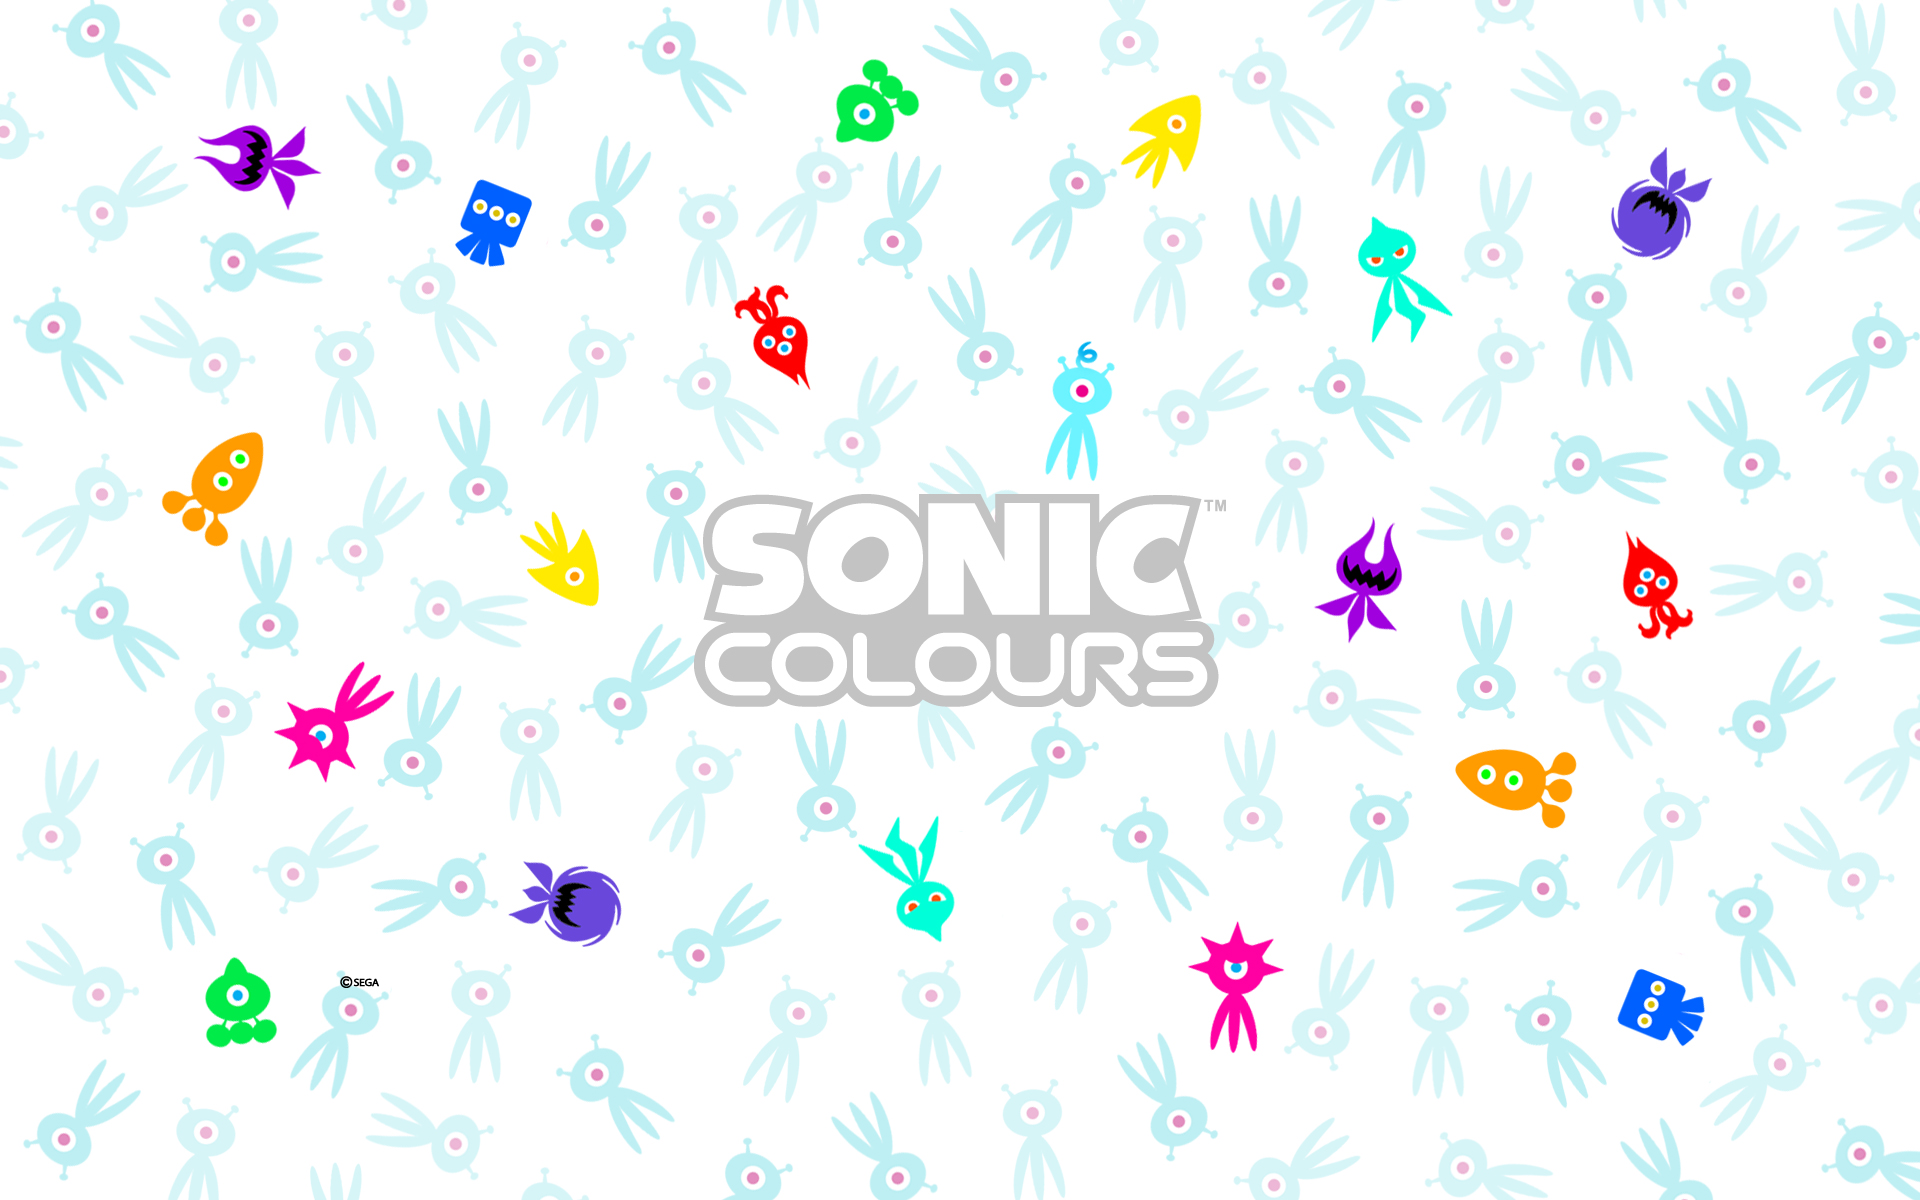 Get Your Exclusive Sonic Colours Wallpaper Here